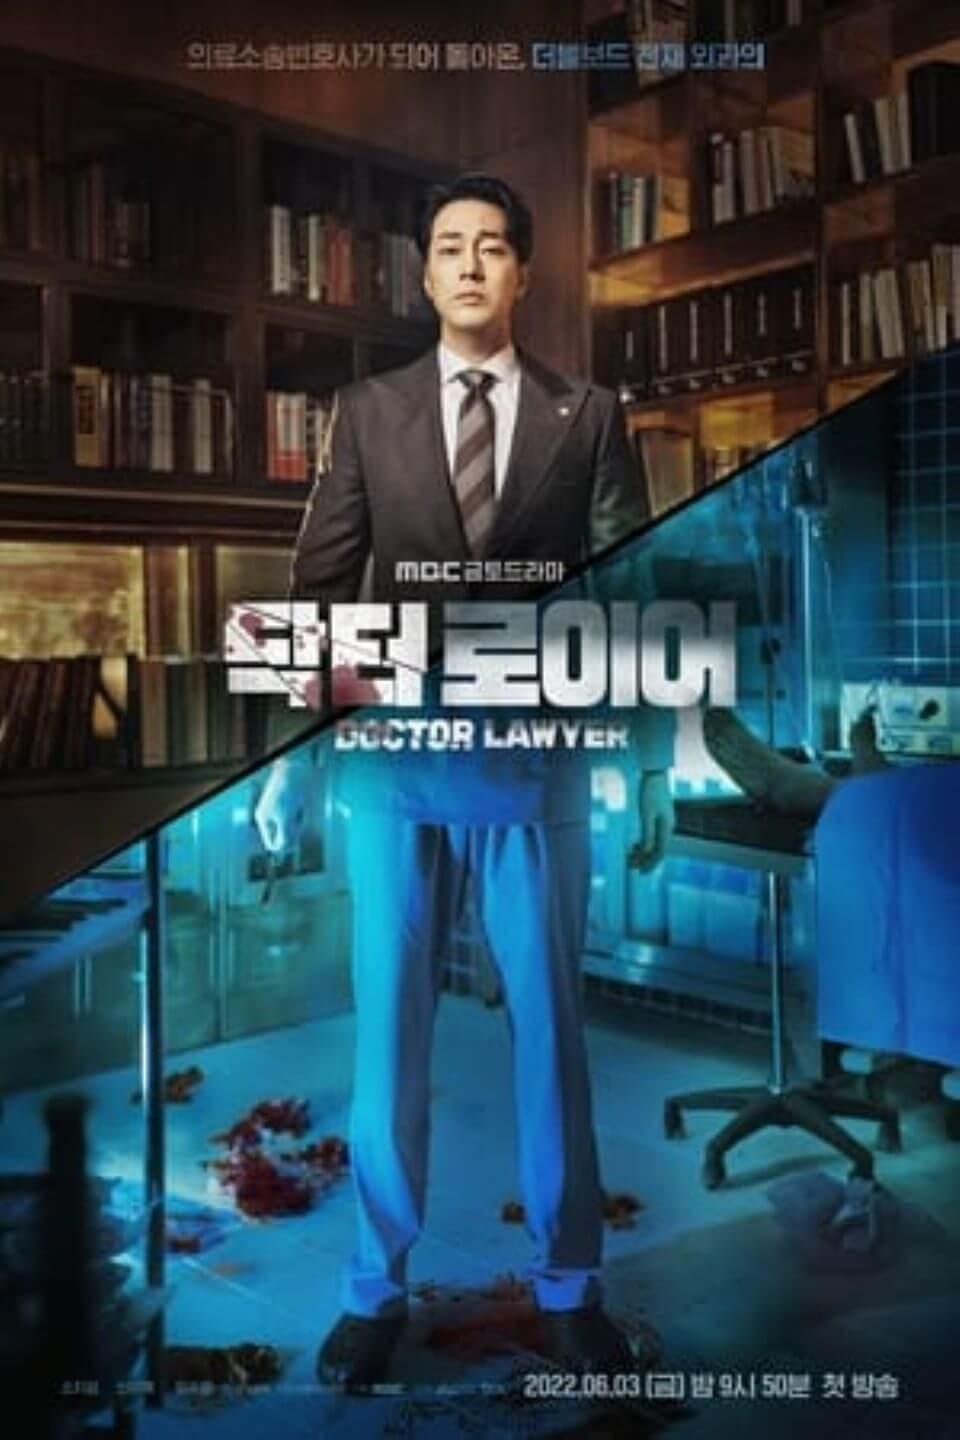 TV ratings for Doctor Lawyer (닥터 로이어) in the United States. MBC TV series